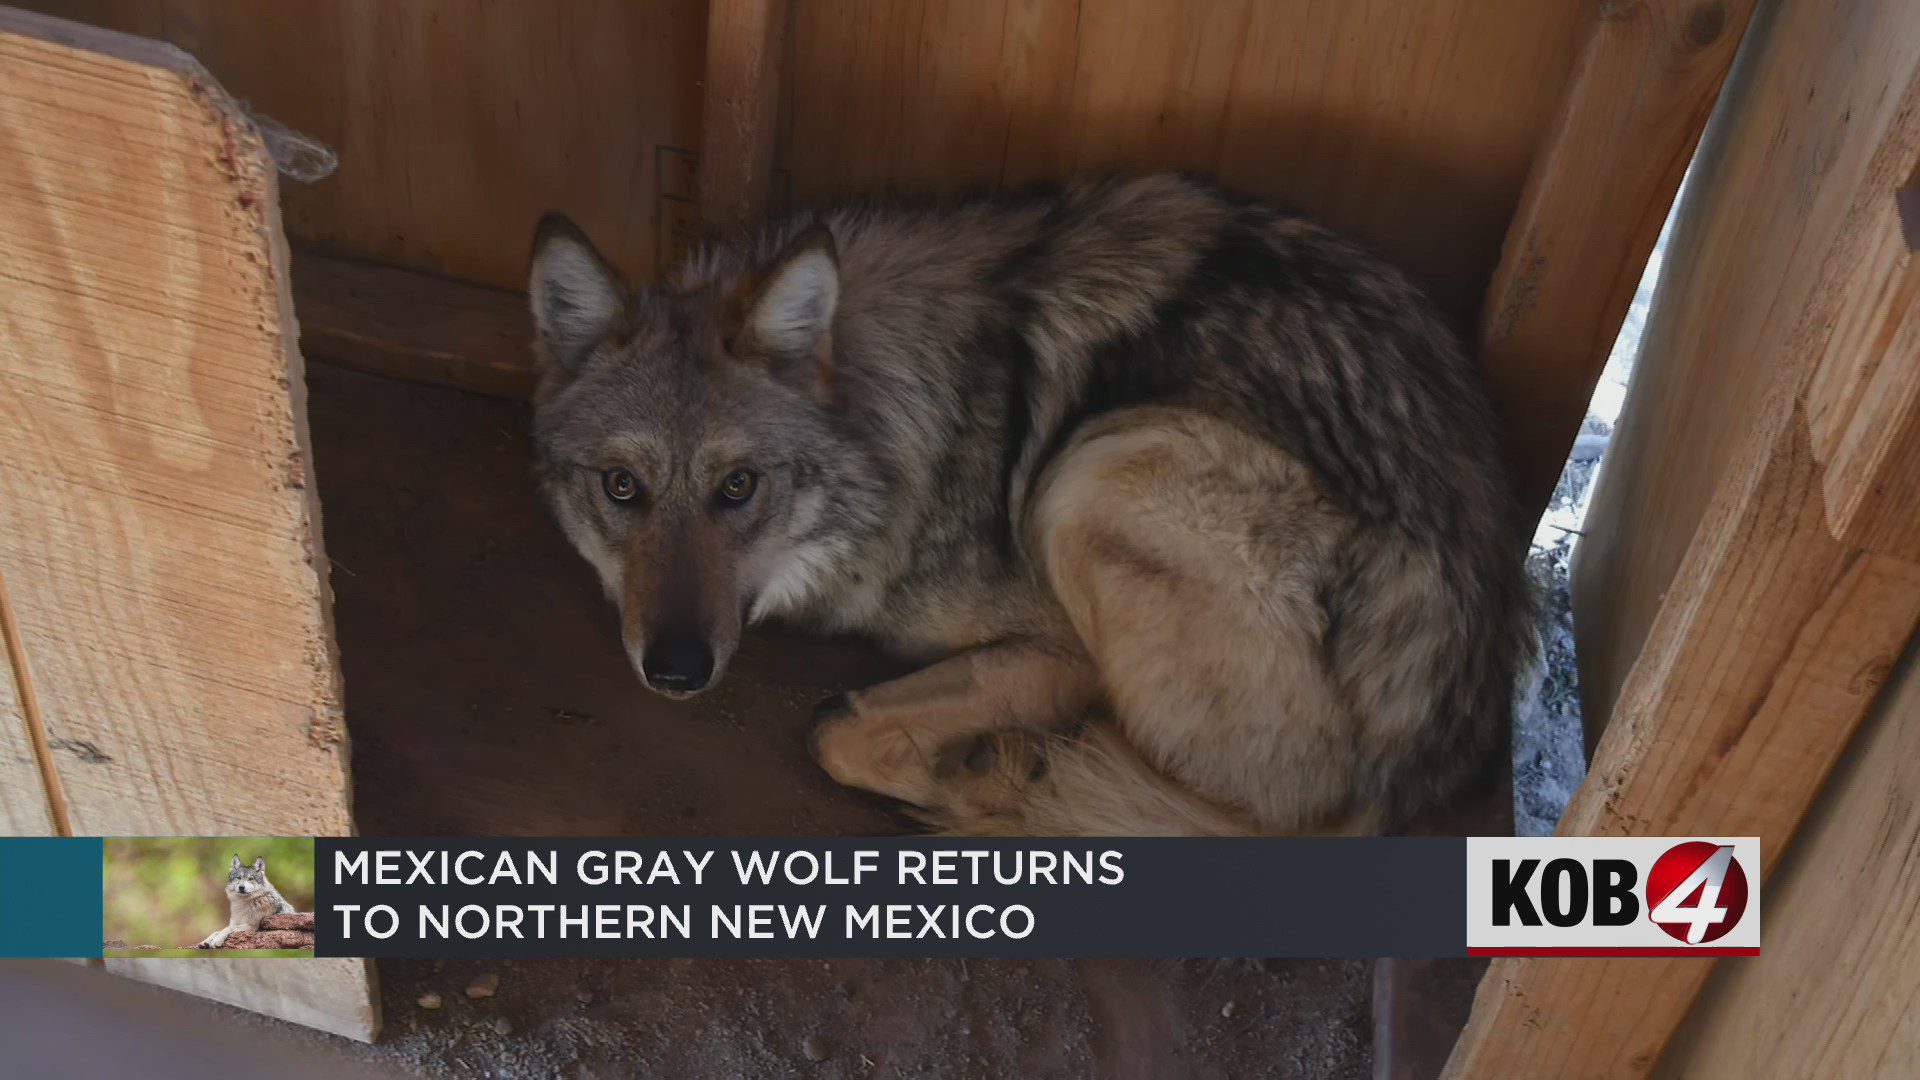 The Mexican gray wolf ‘Asha’ roams northern New Mexico